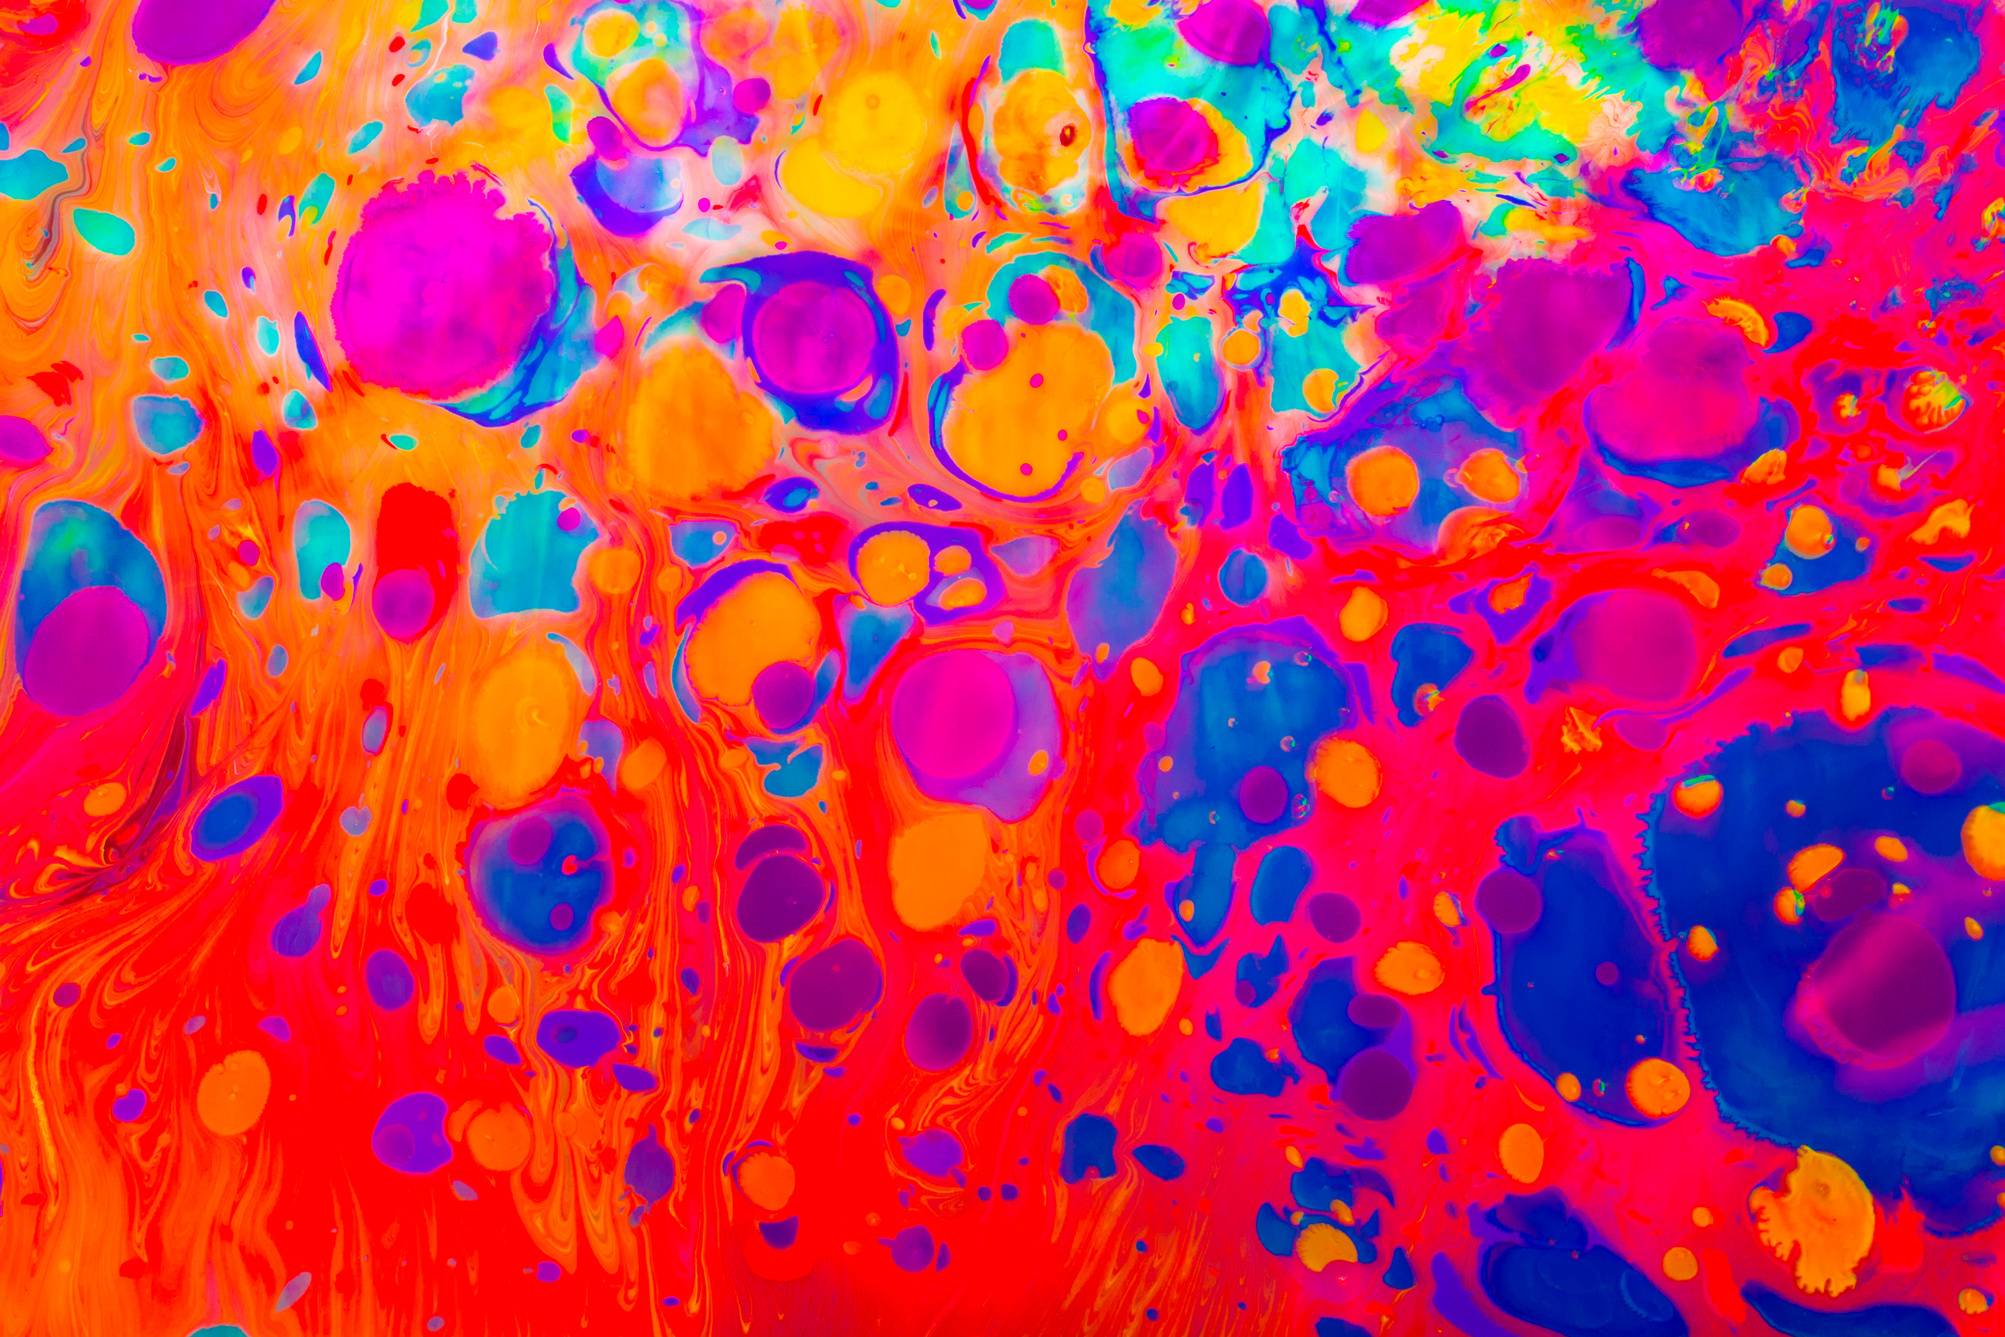 Abstract Marbling Art Patterns  as Colorful Background